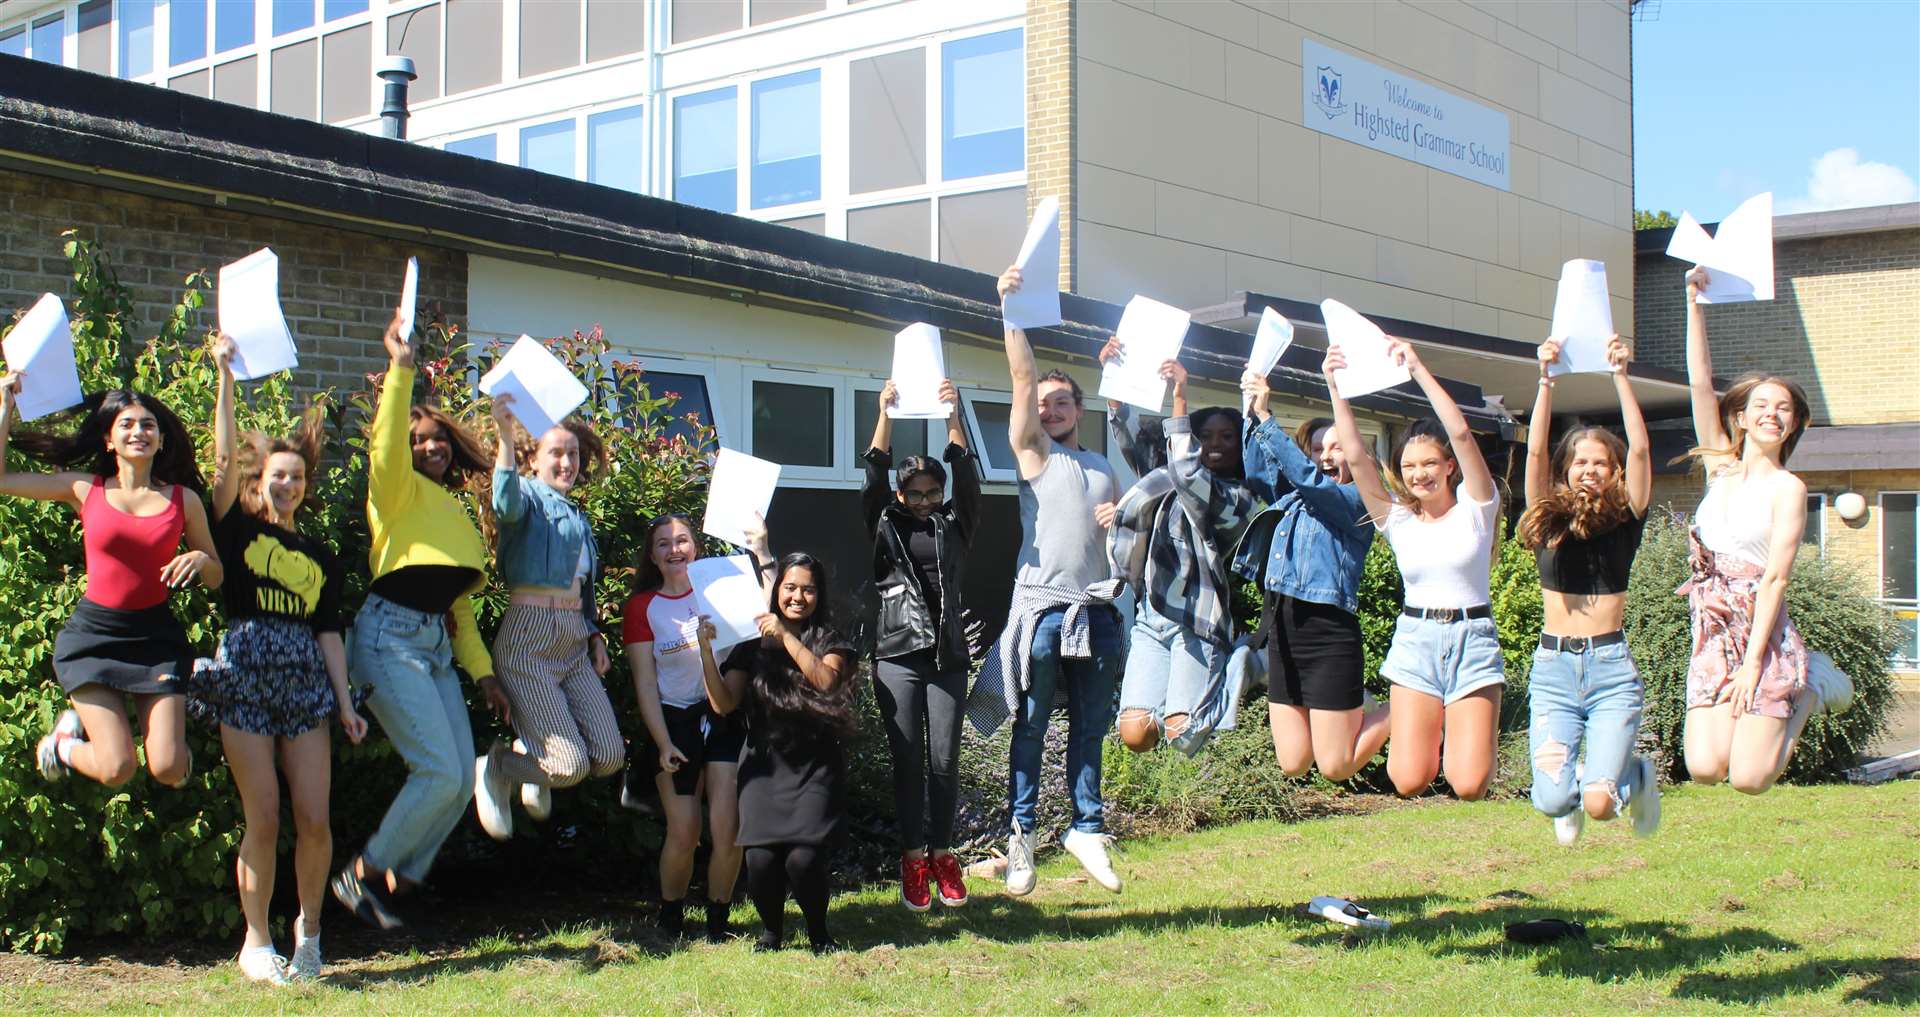 Highsted Girls Grammar School pupils at Sittingbourne celebrating their A-level results